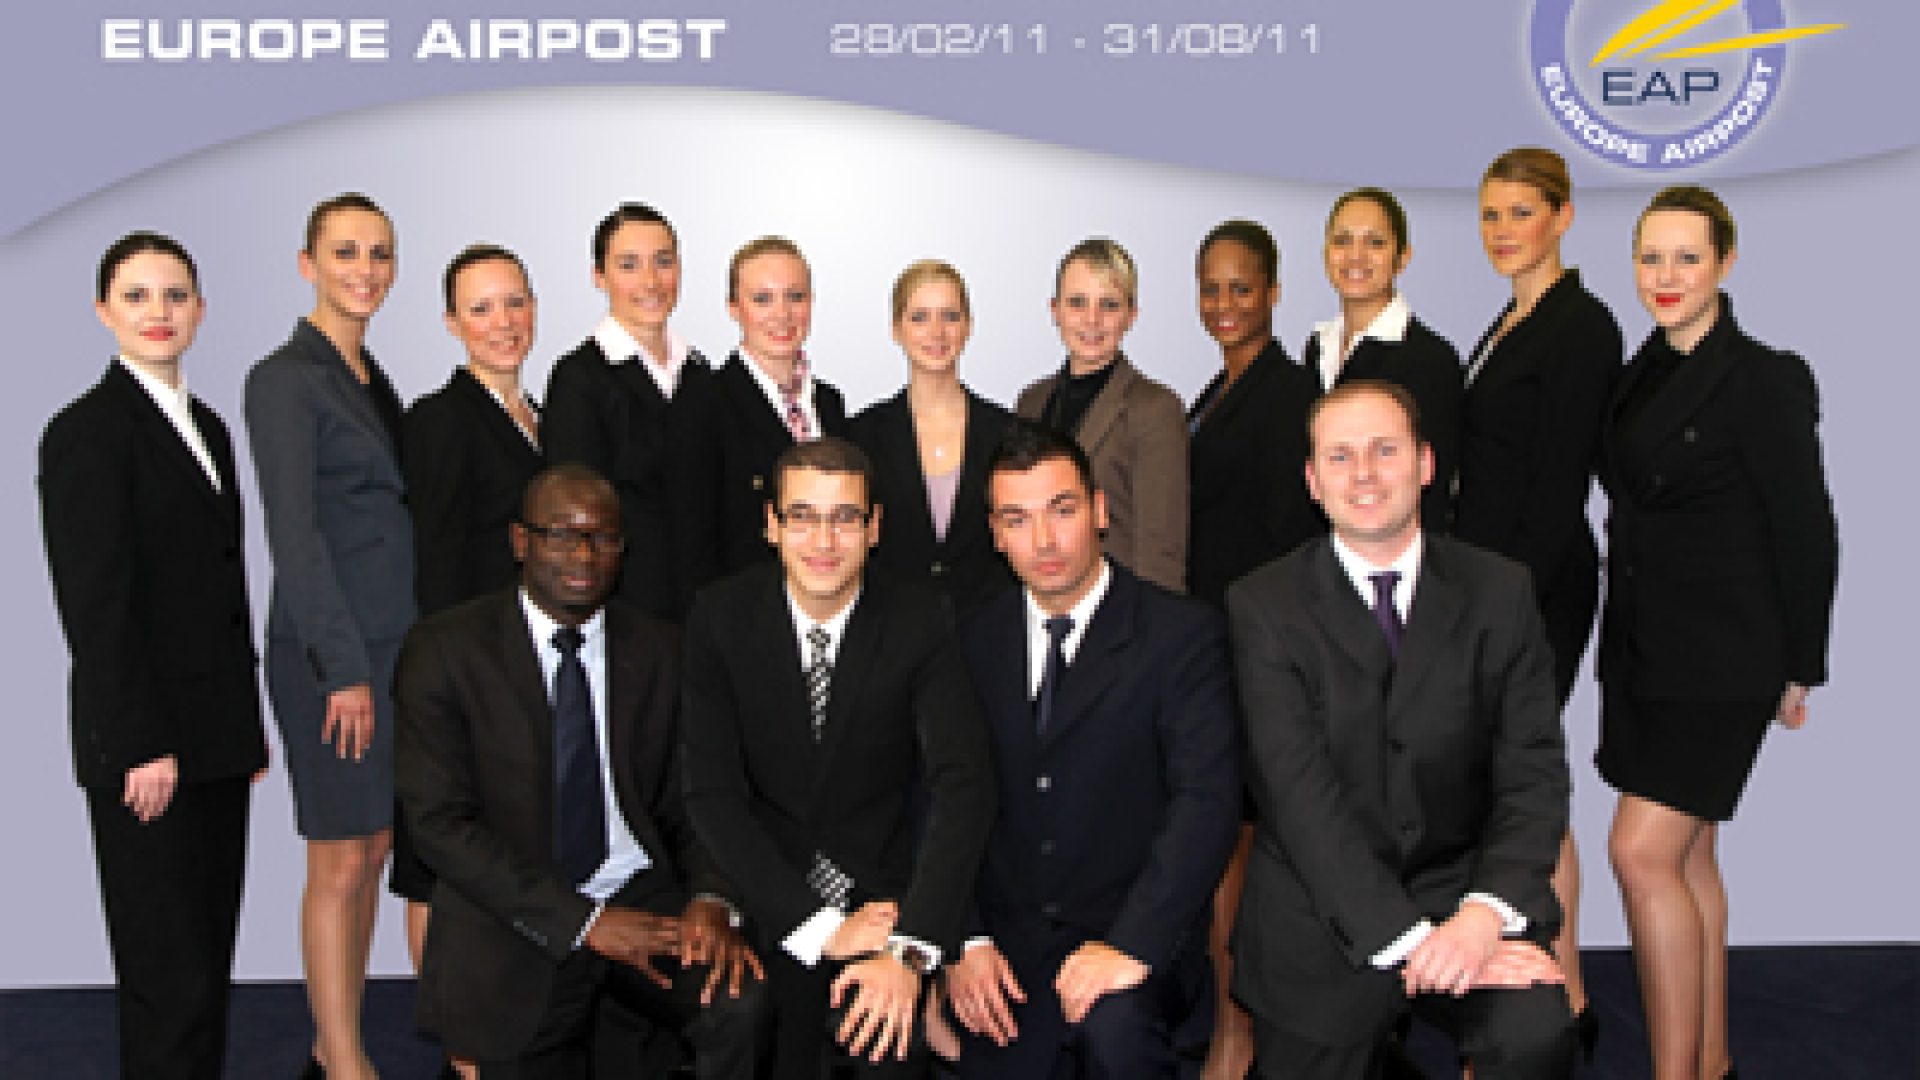 752-cover-airpost_promotion